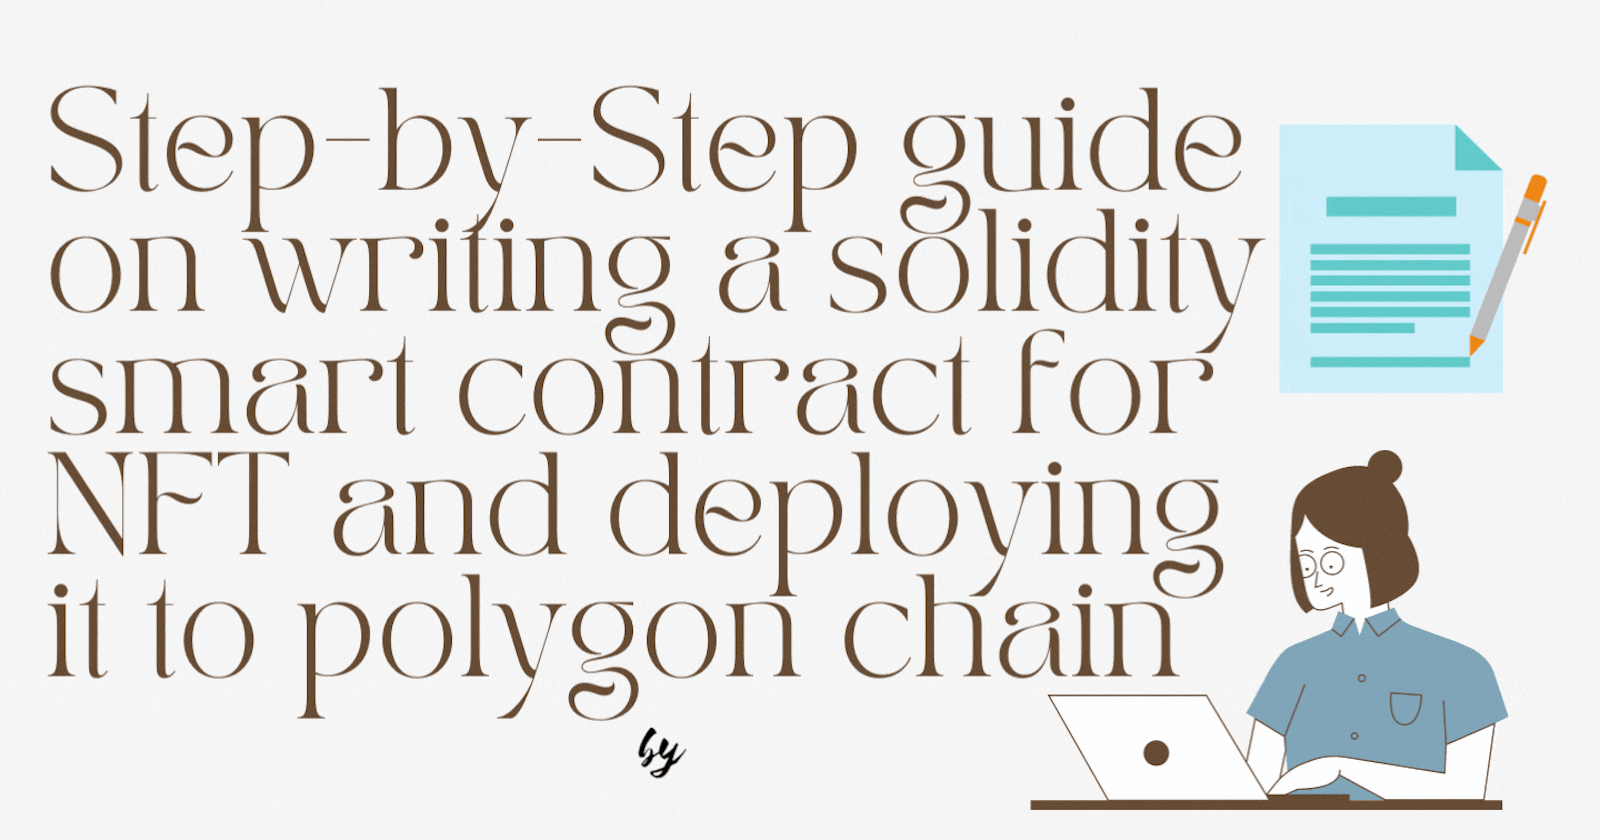 How to write a smart contract in solidity, deploy, and mint a simple NFT on the Polygon blockchain